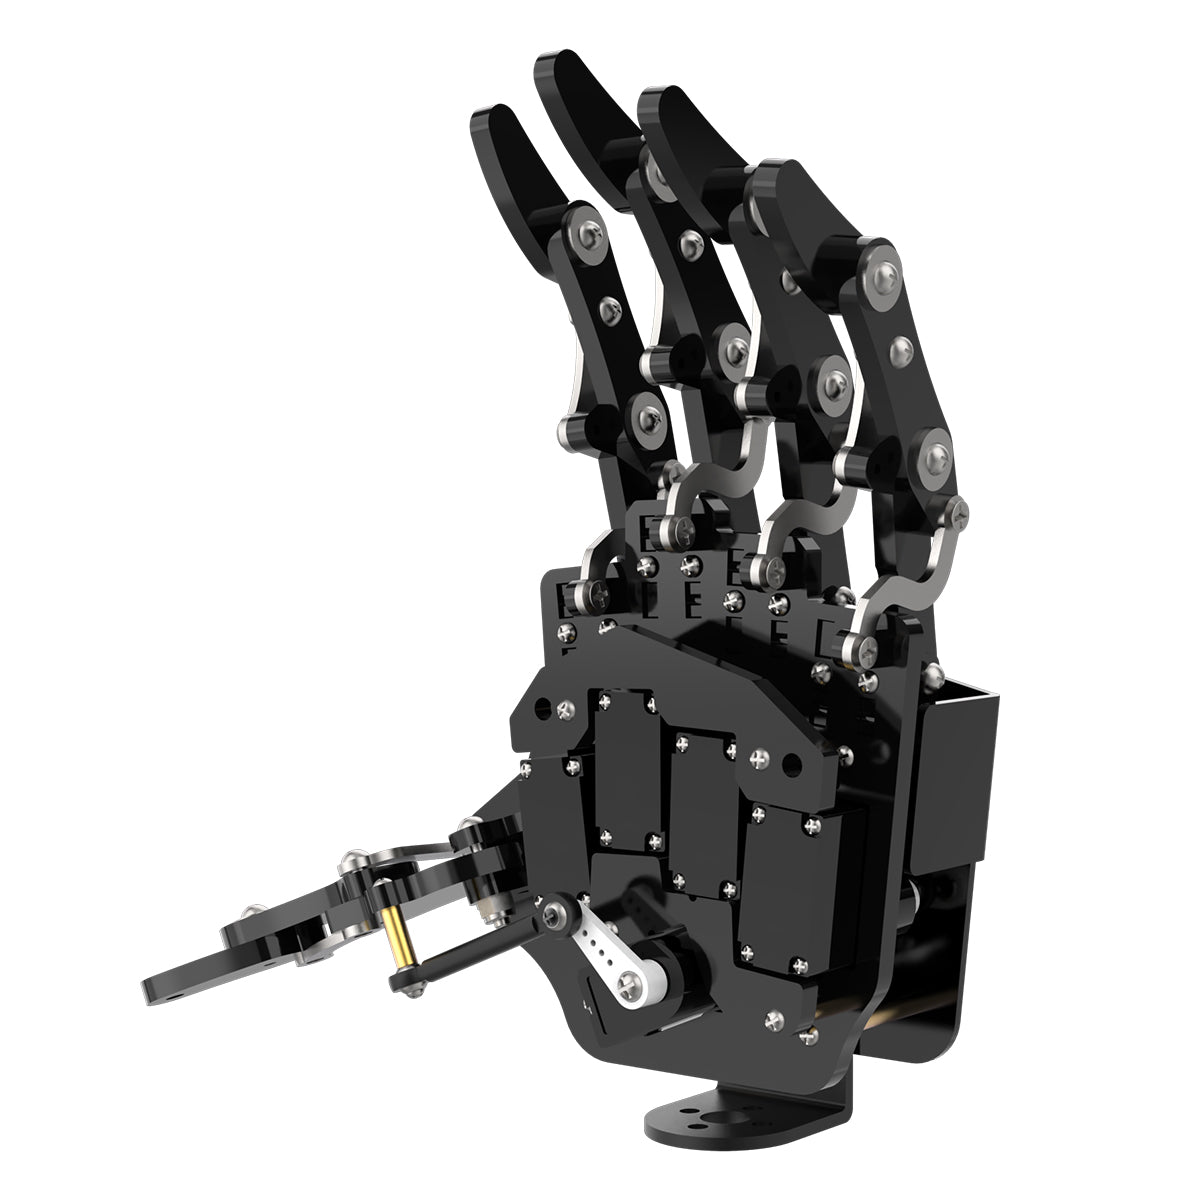 uHand: Hiwonder Robotic Hand Fingers Move Individually for Robot DIY